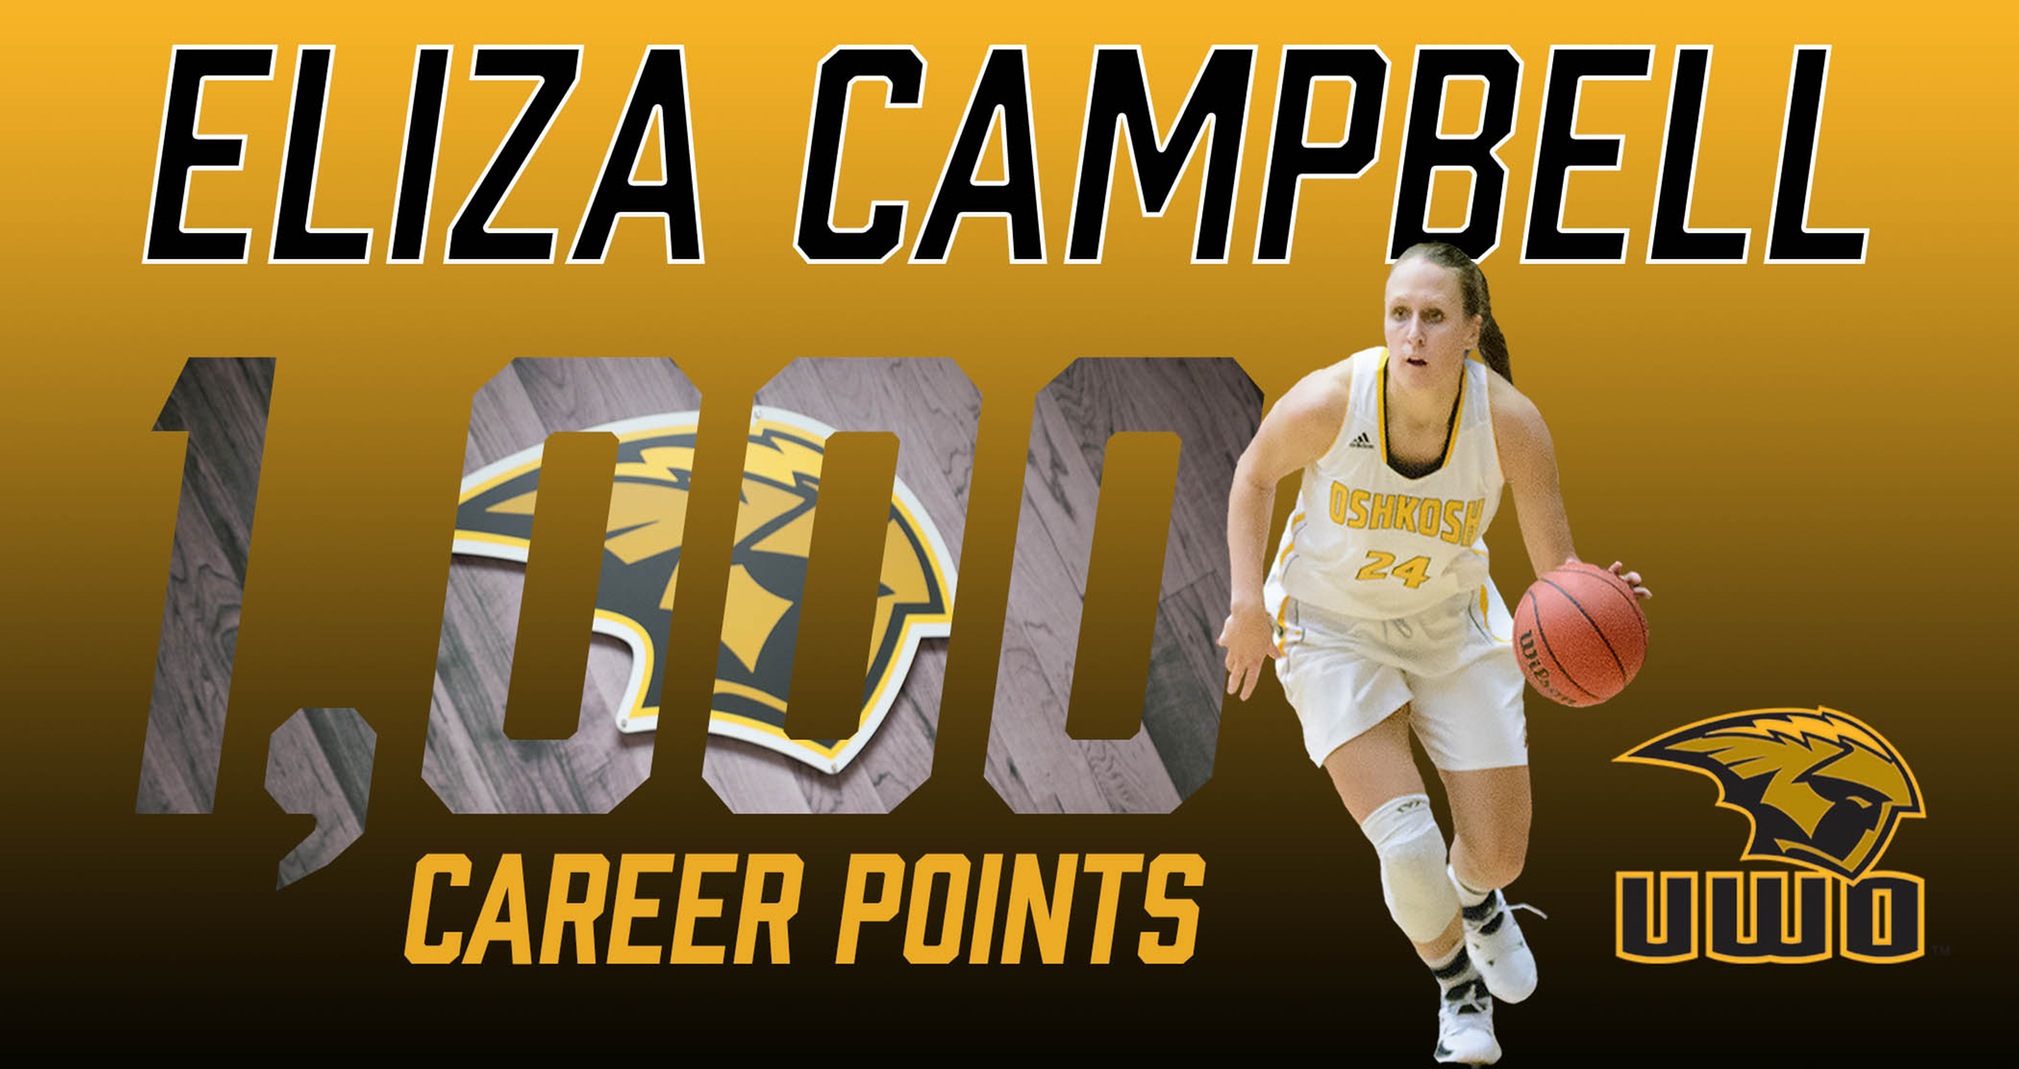 Eliza Campbell became the 21st Titan to reach 1,000 career points during UW-Oshkosh's win over UW-Stout.